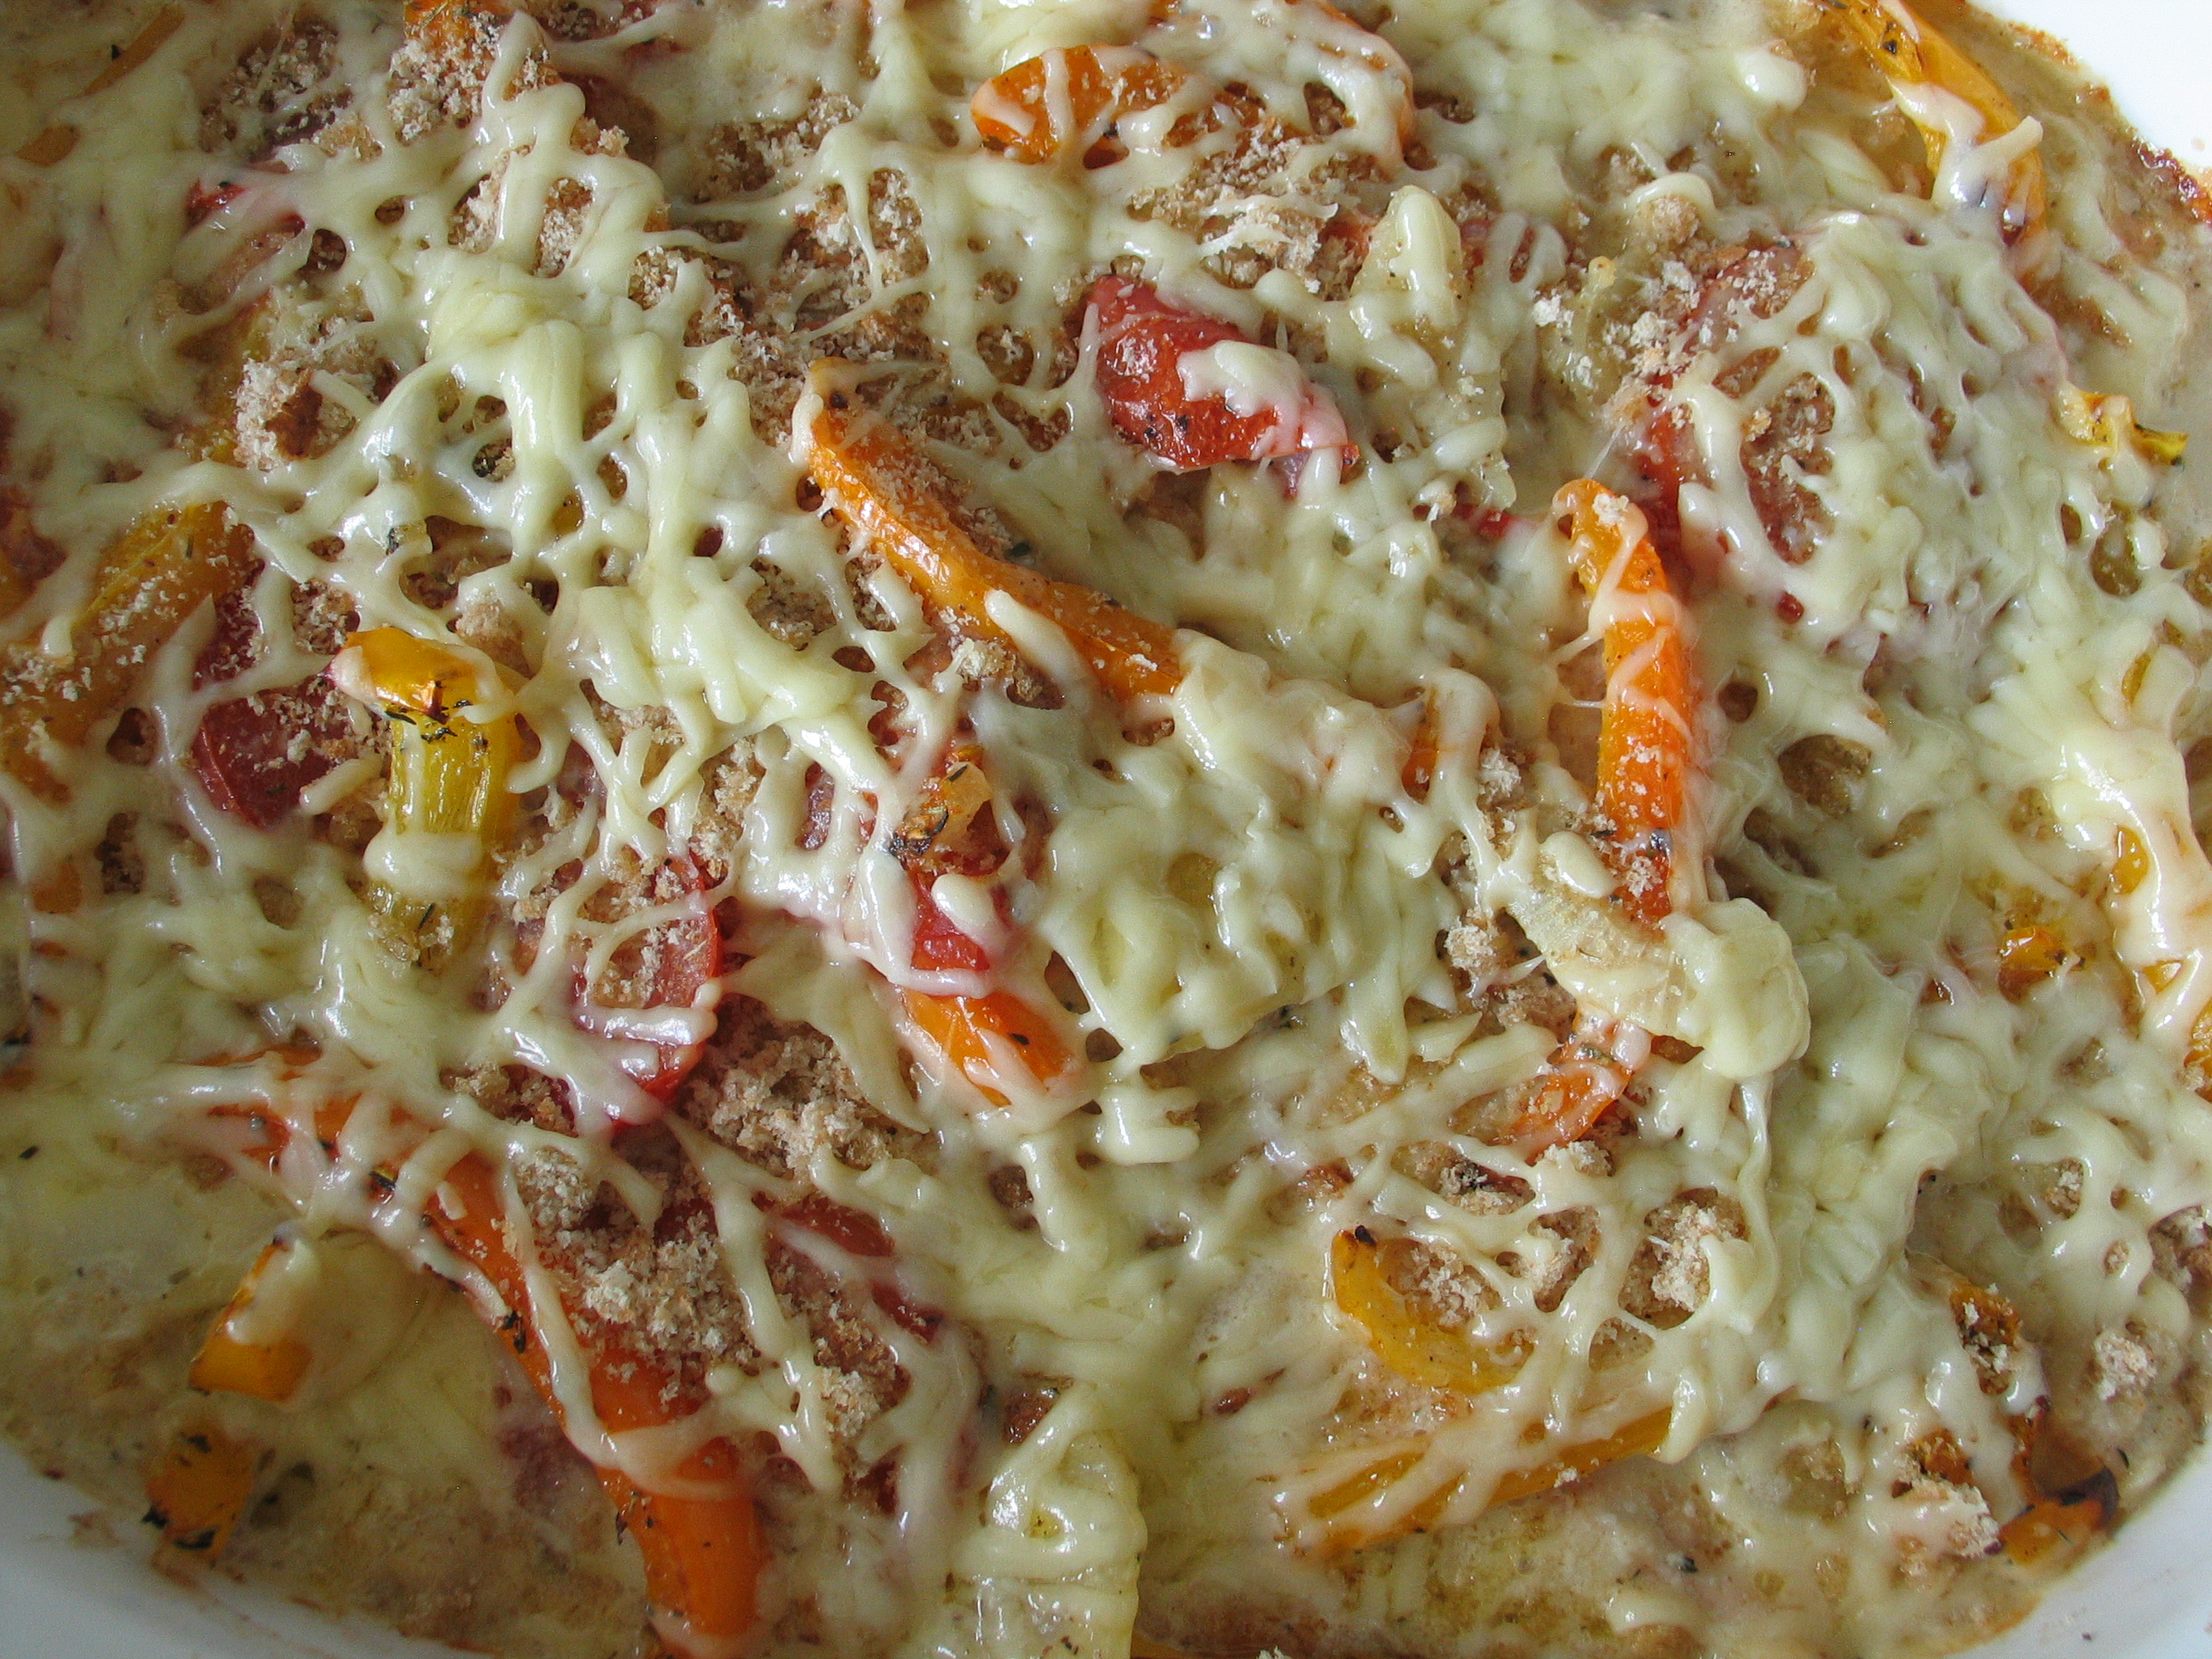 Scalloped Potatoes with Tomatoes and Peppers